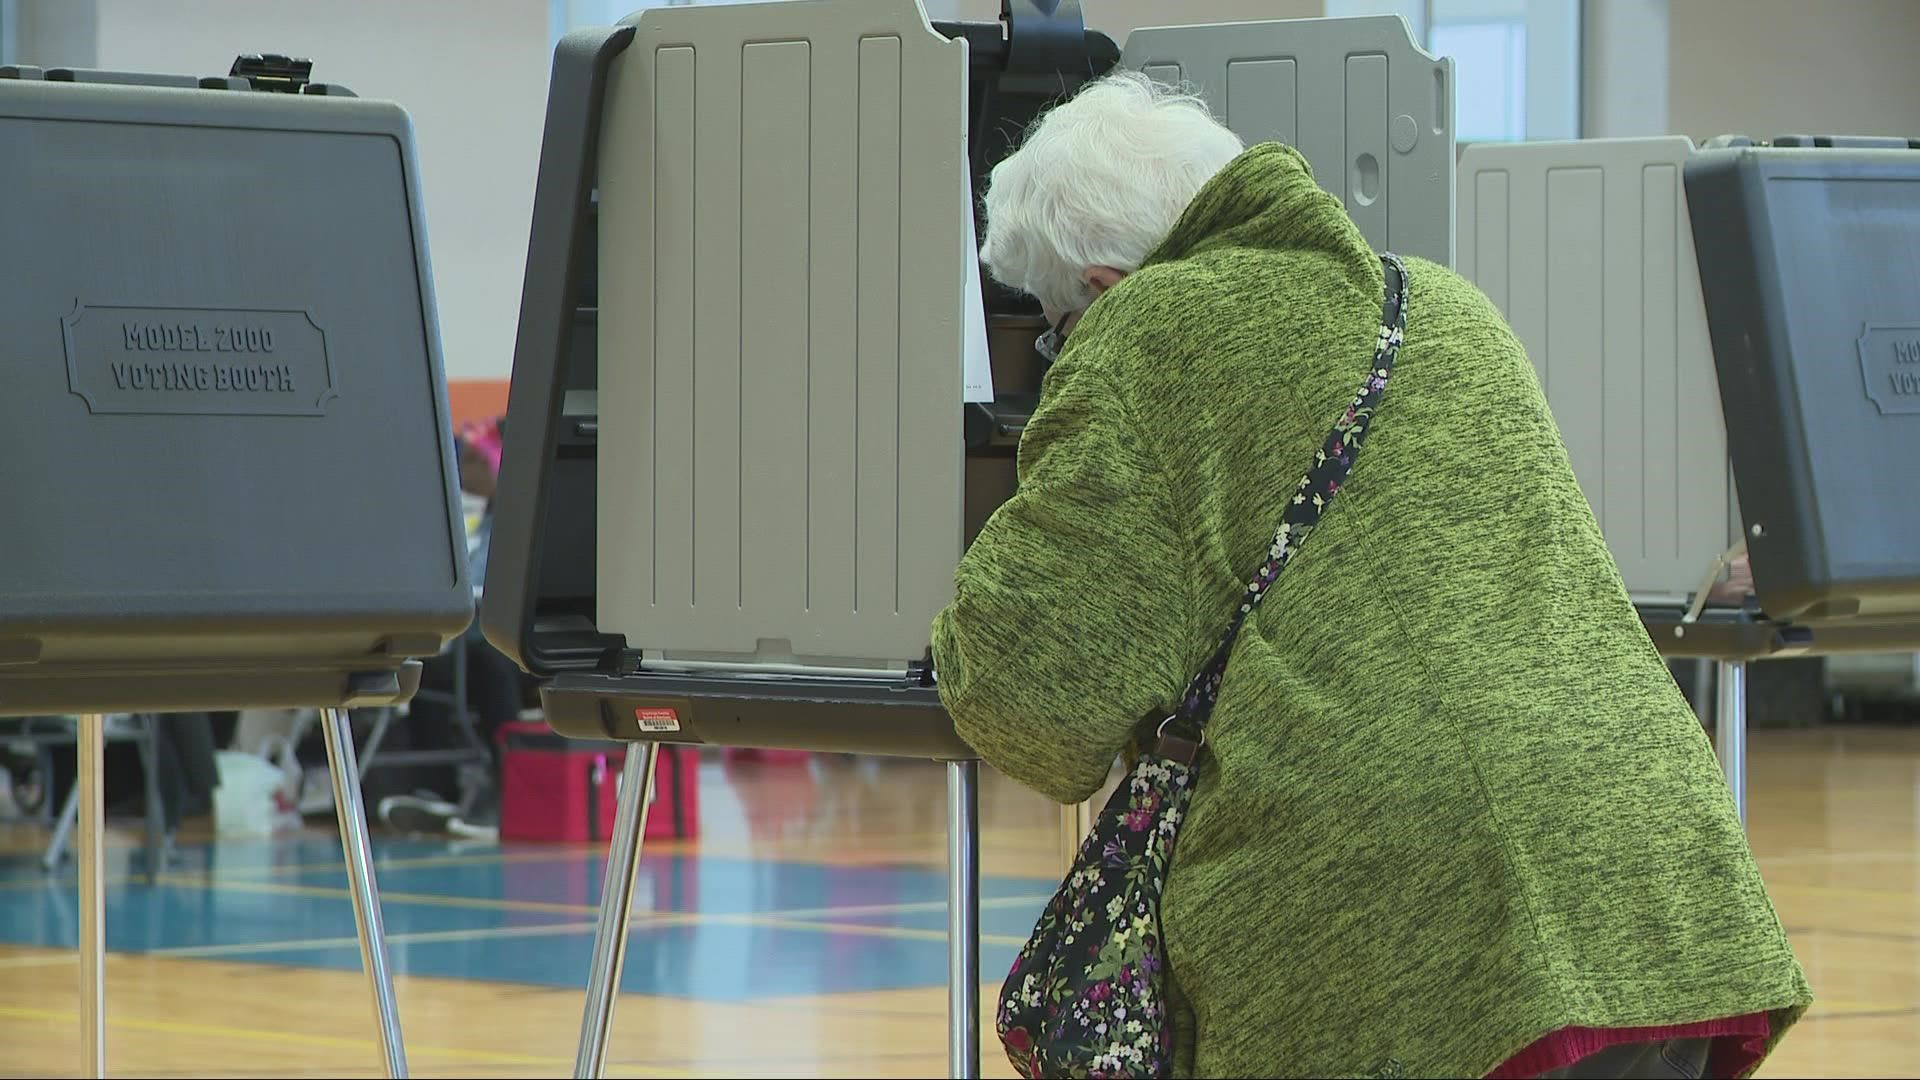 Less than two hours after polls opened throughout Ohio at 6:30 a.m. Tuesday, reports started coming in that some polling locations were having issues.